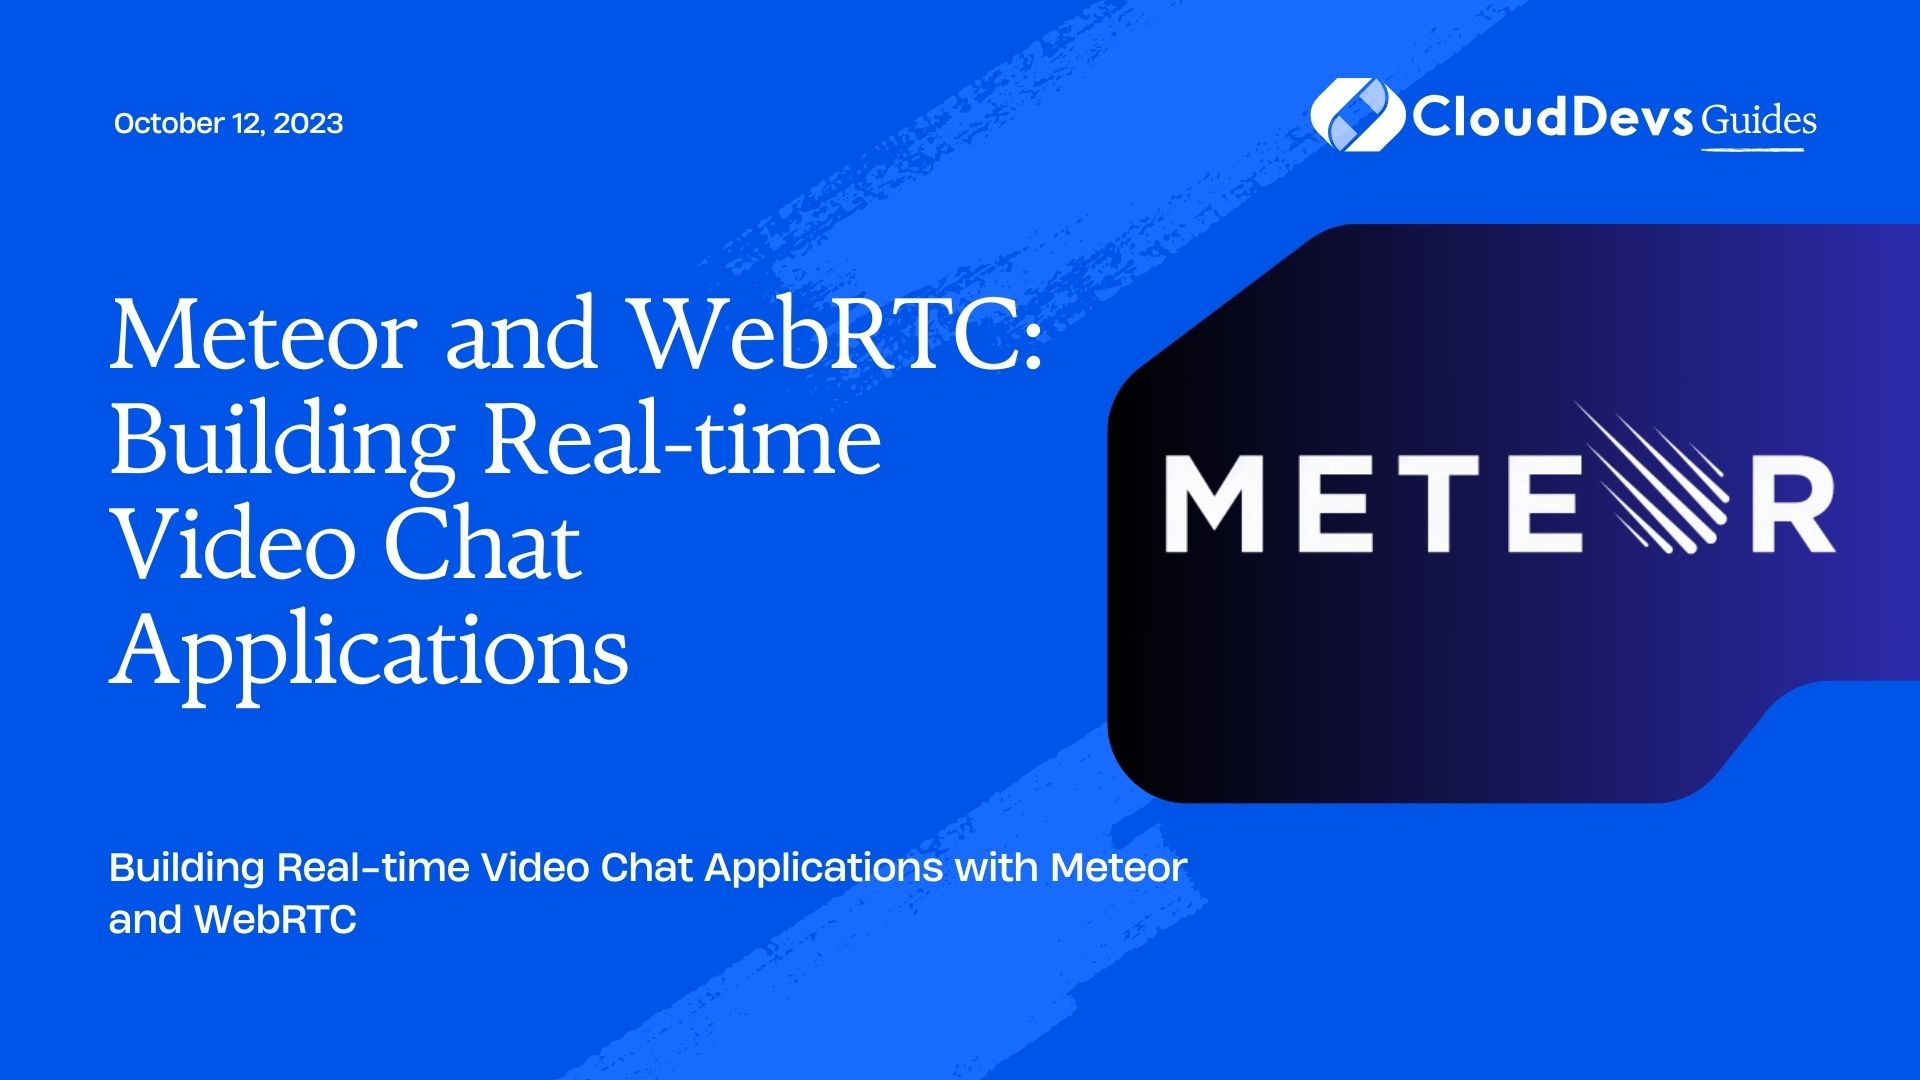 Meteor and WebRTC: Building Real-time Video Chat Applications